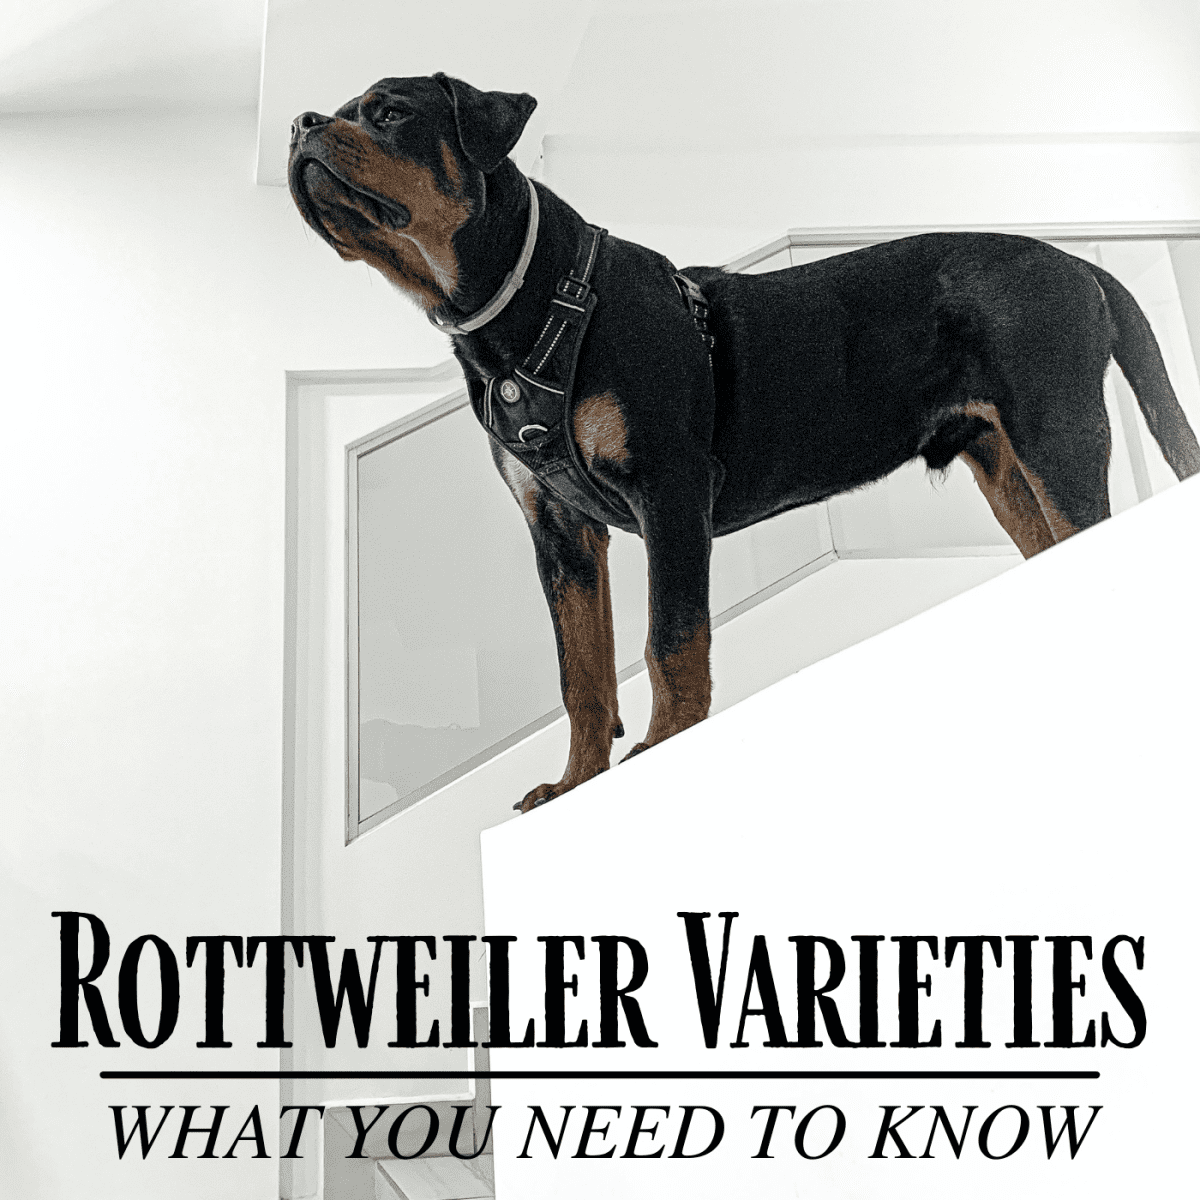 are rottweilers considered long hairor short hair